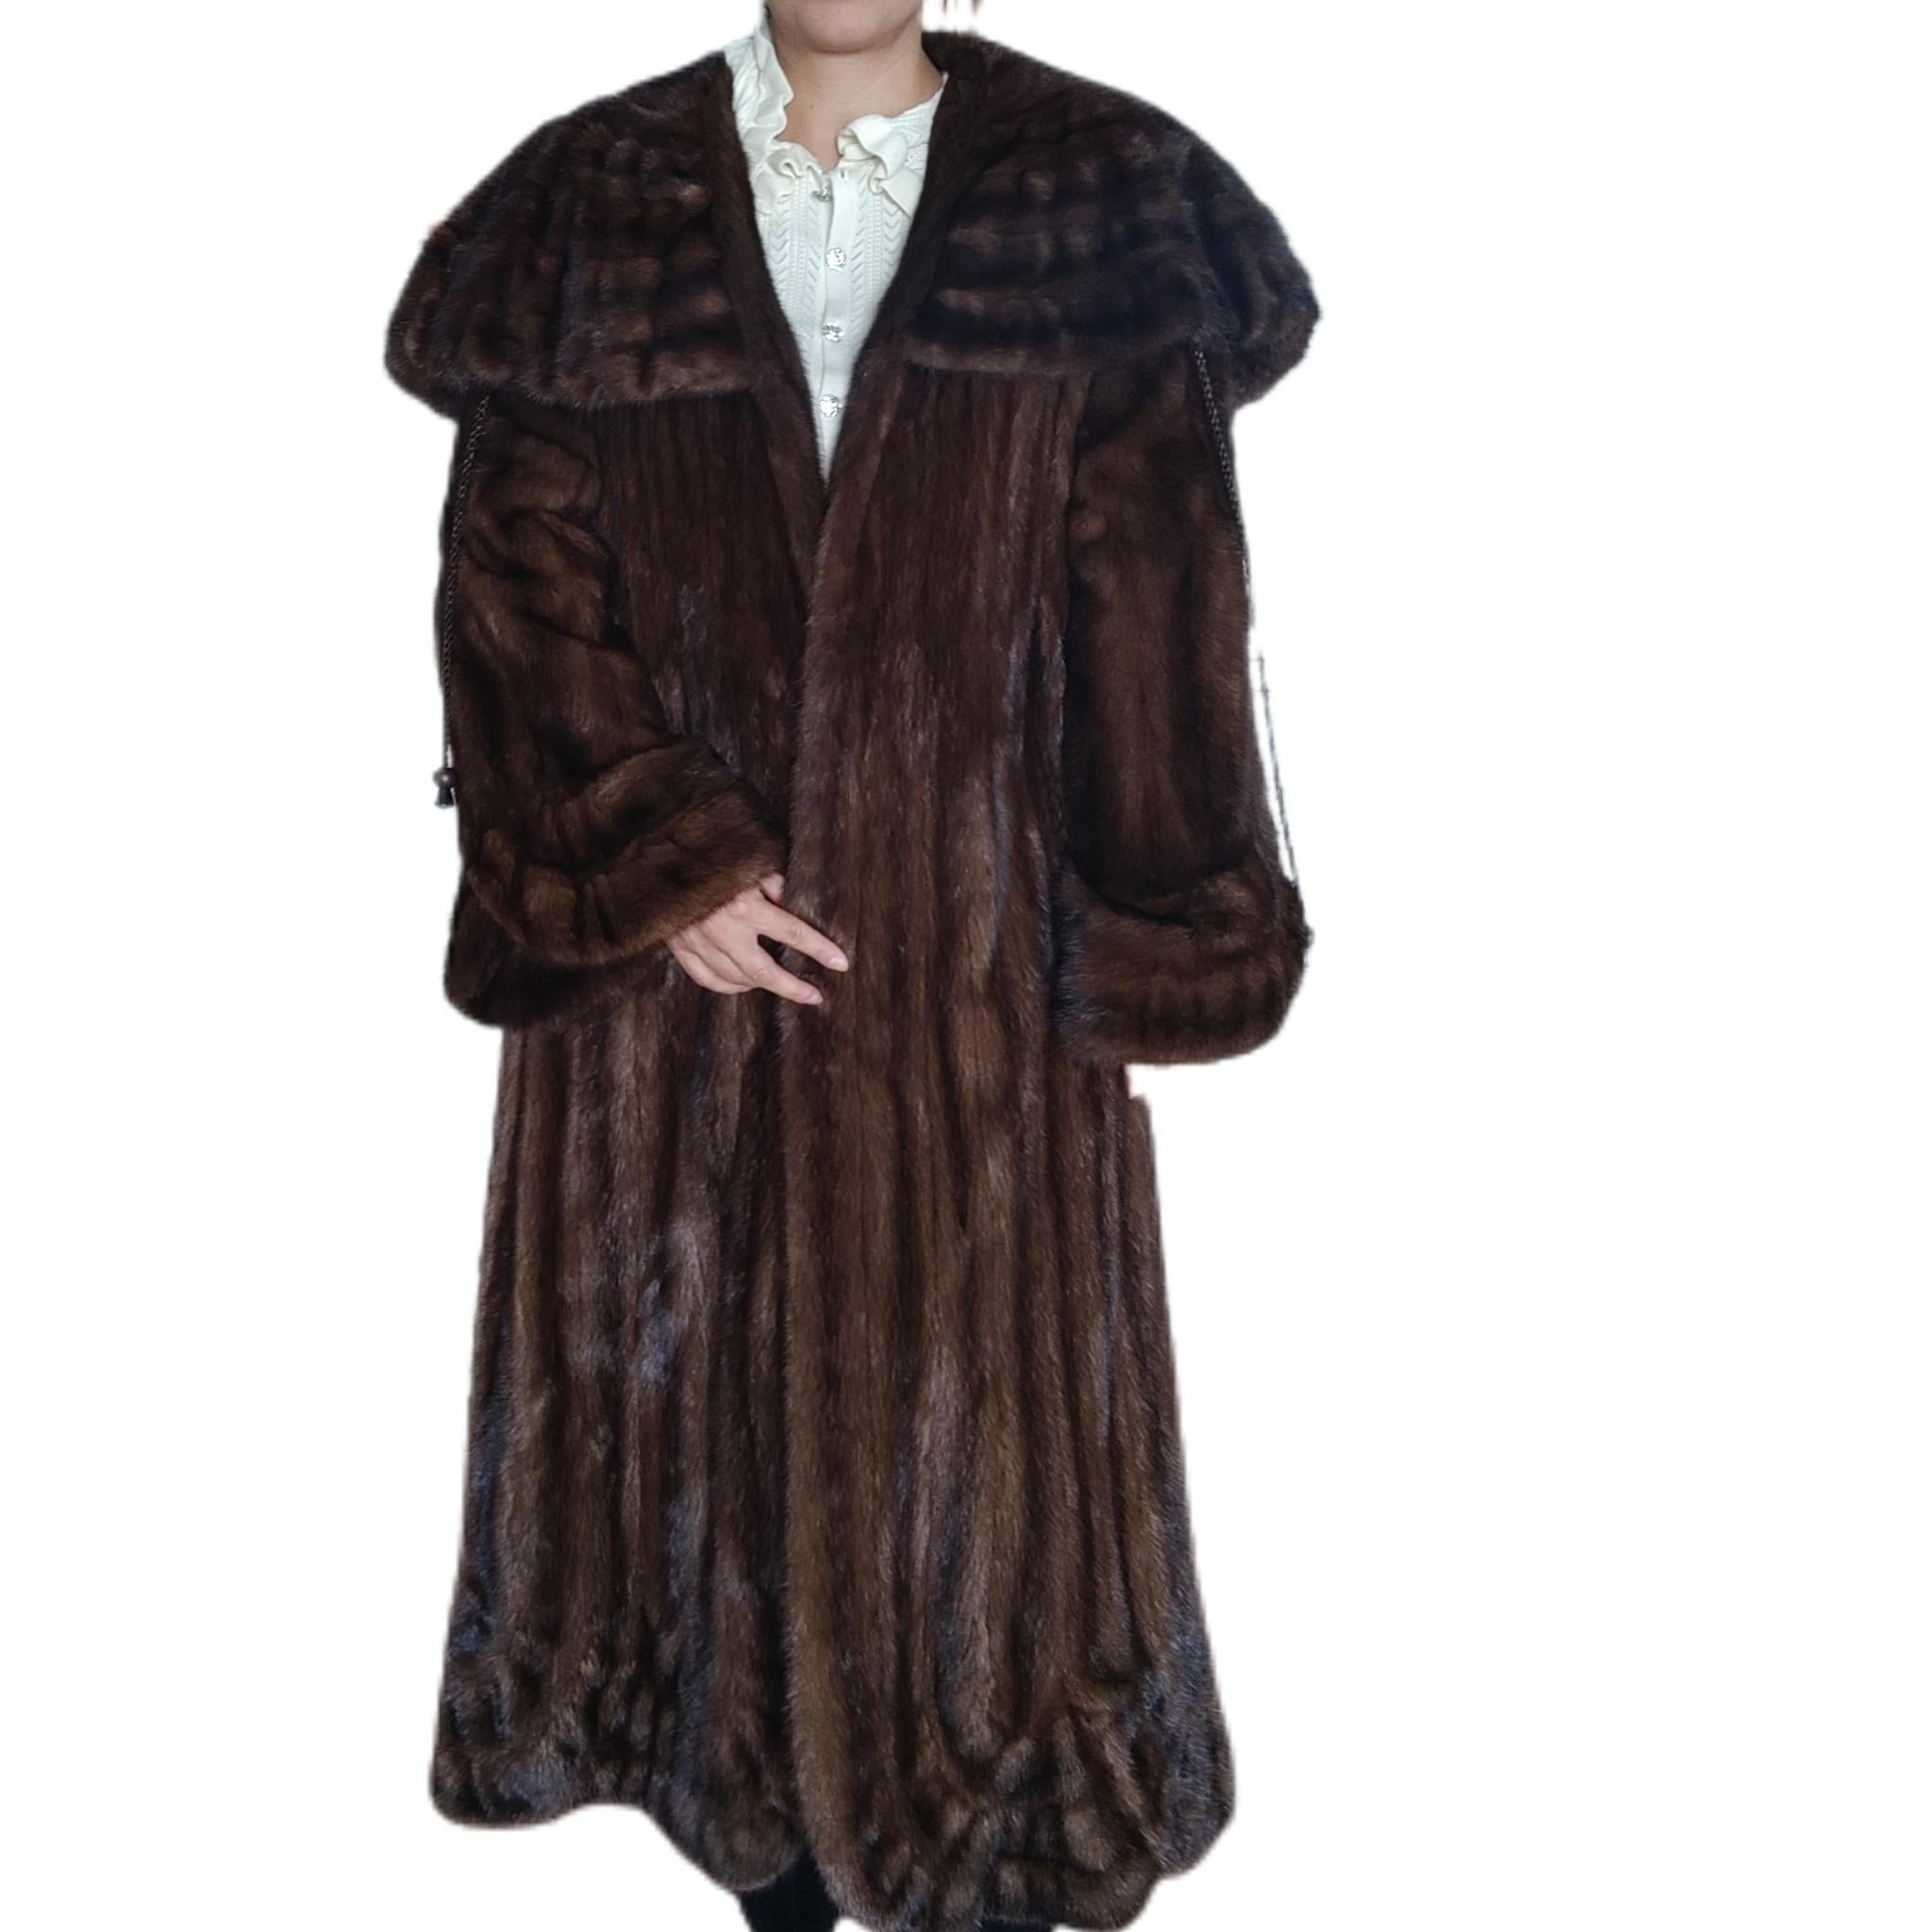 PRODUCT DESCRIPTION:

Brand New Christian Dior Demi Buff Mink Fur Swing Coat (Size 24 2XL)
Tag NS115

Condition: New

Closure: Hooks & Eyes

Color: Demi Buff

Material: High quality mink 

Garment type: long length Coat

Sleeves: Bell with Ruffles